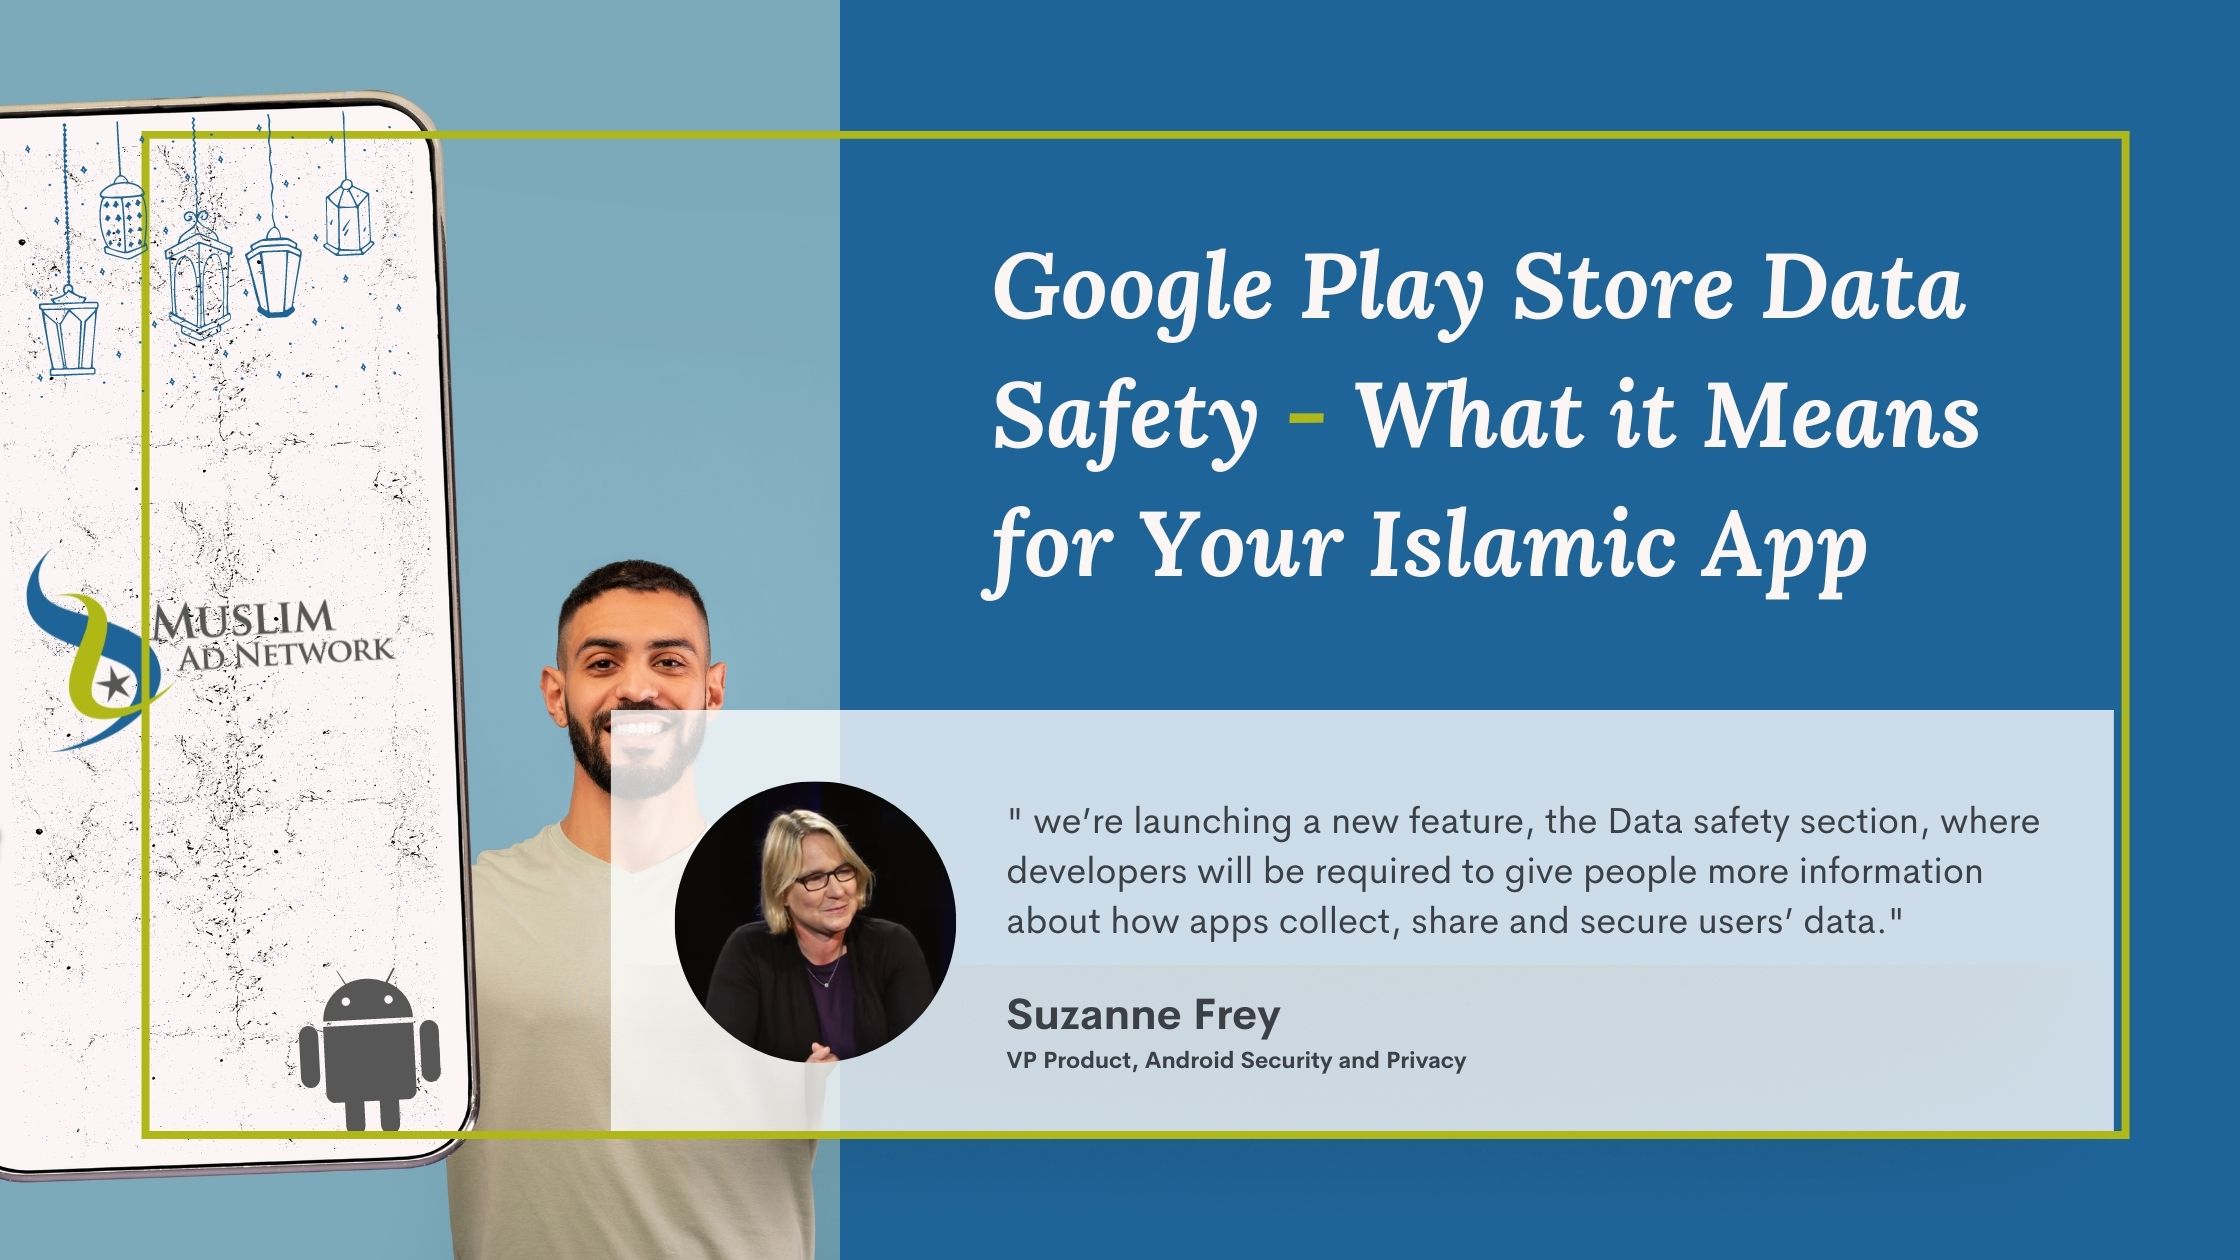 Google Play Store’s Data Safety - What it Means for Your Islamic App